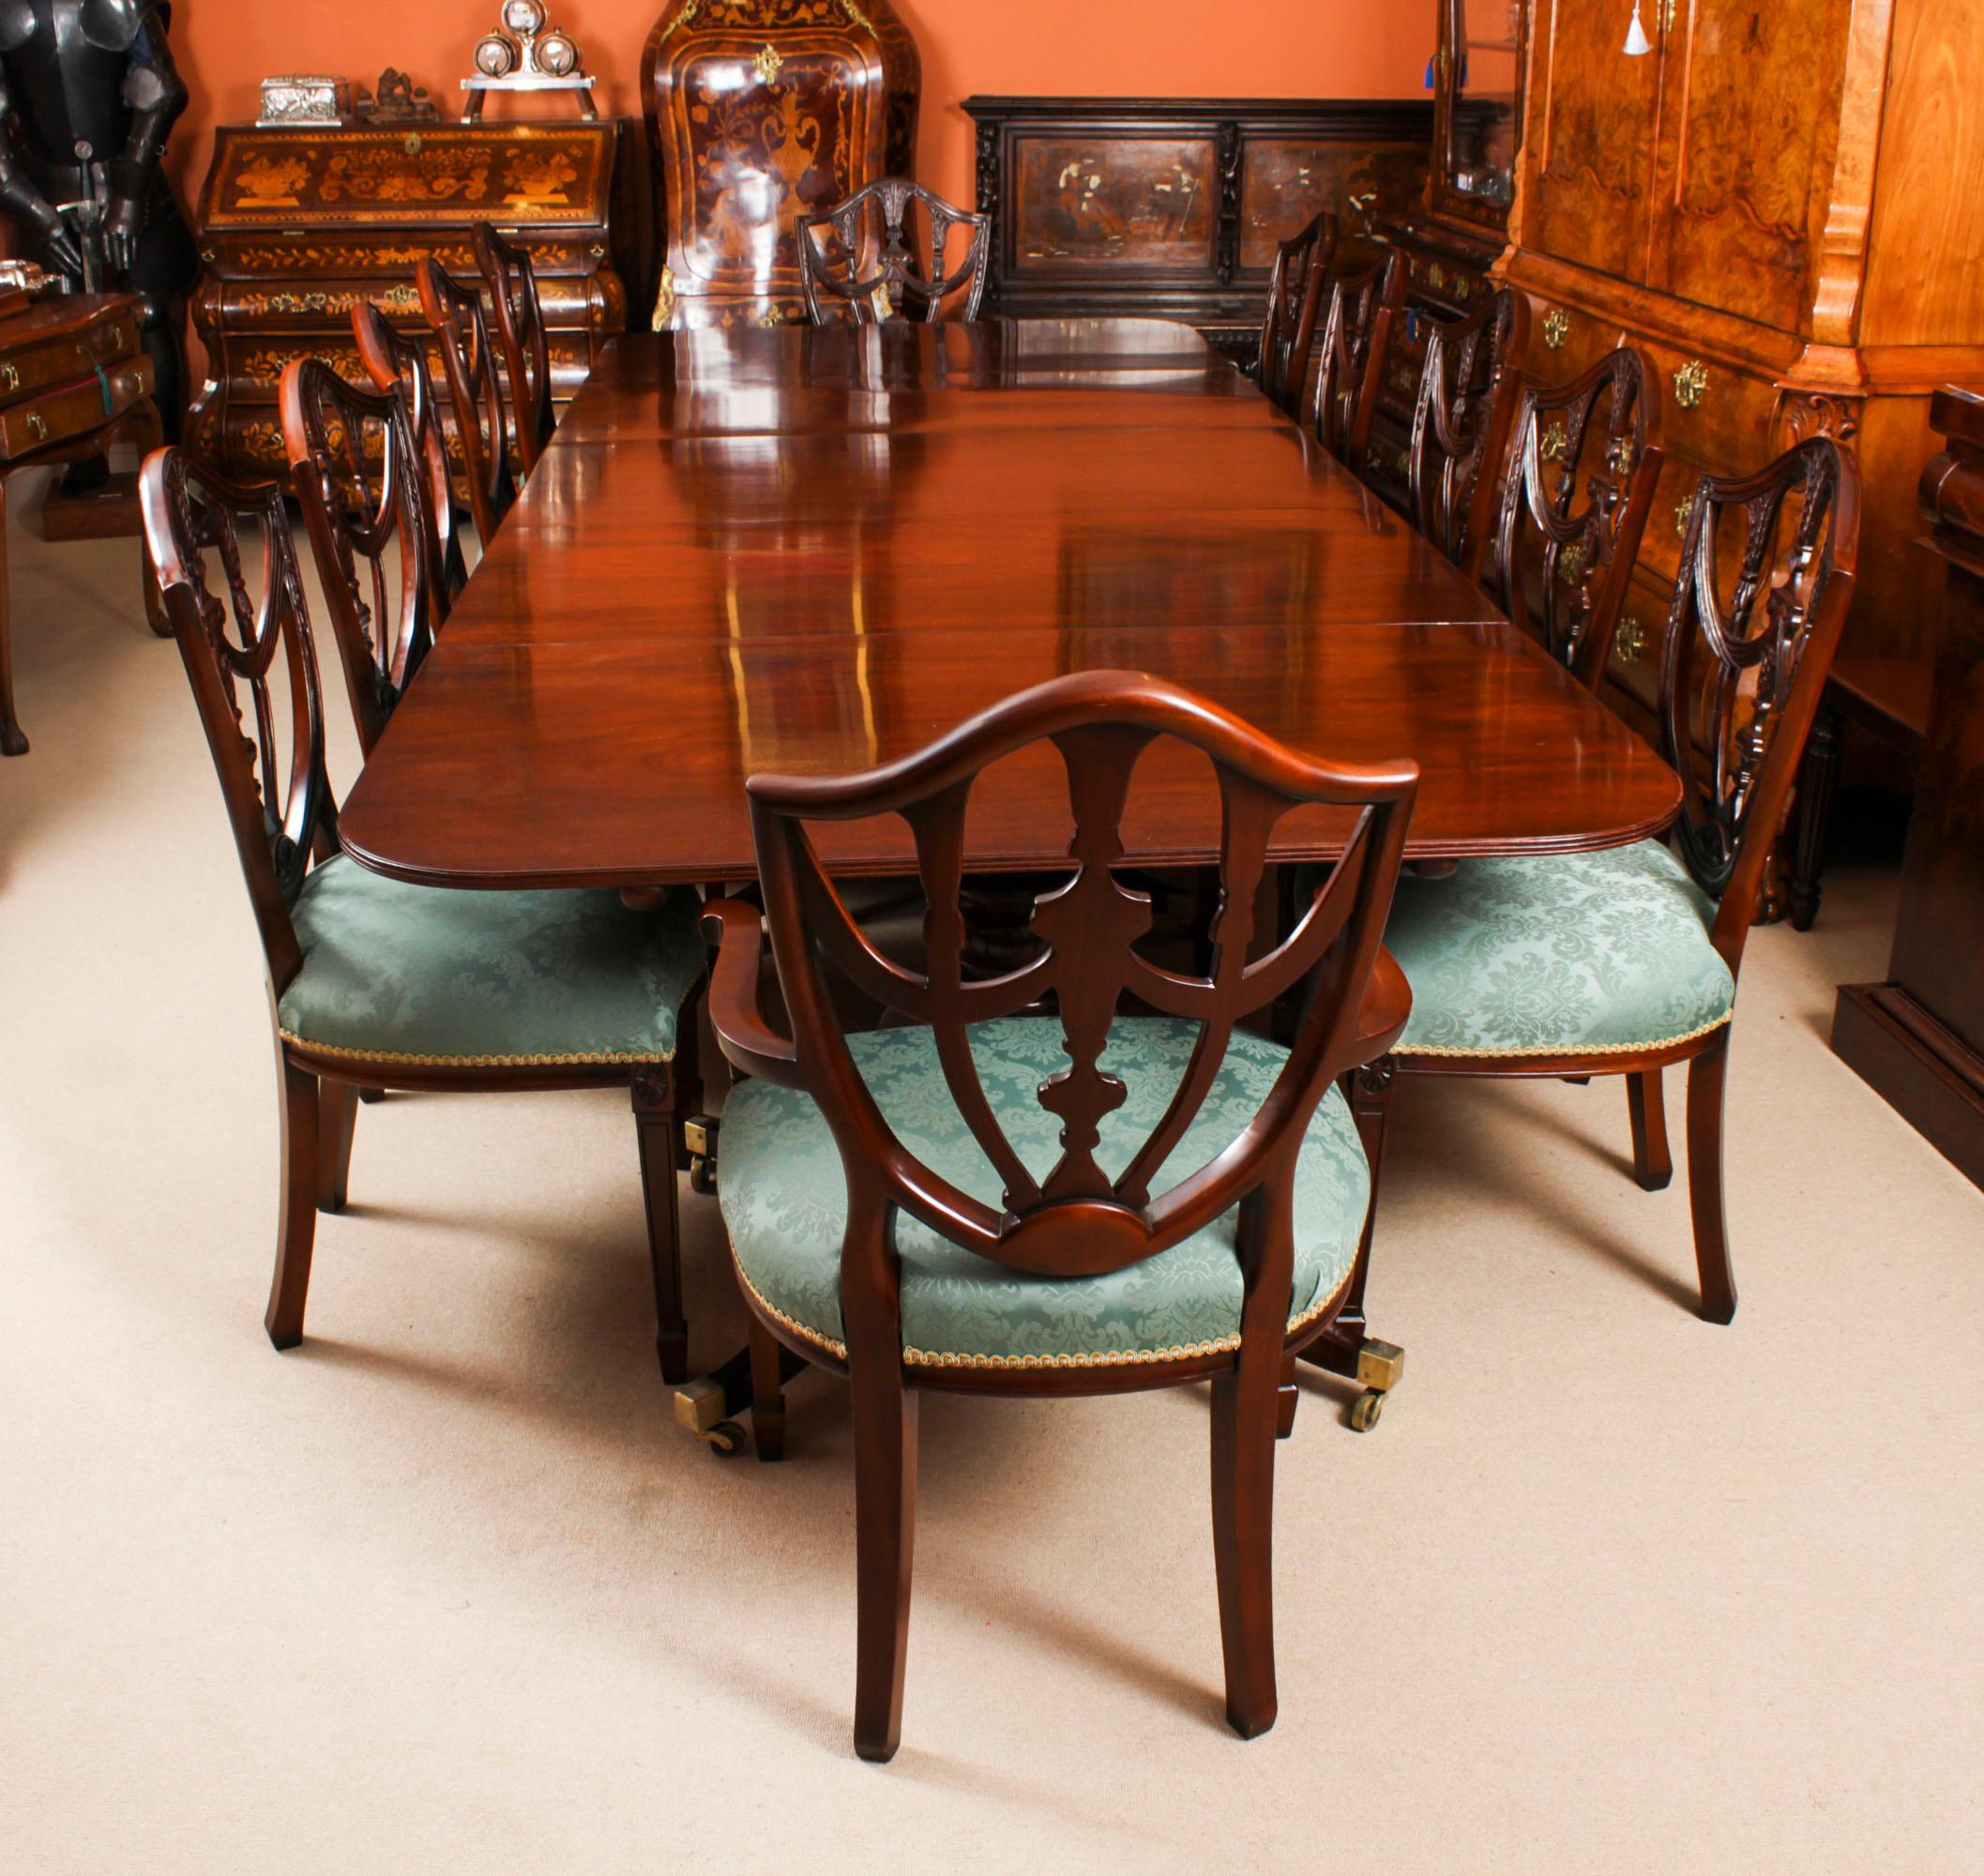 Antique 12ft Regency Mahogany Triple Pillar Dining Table c1830 19th Century In Good Condition For Sale In London, GB